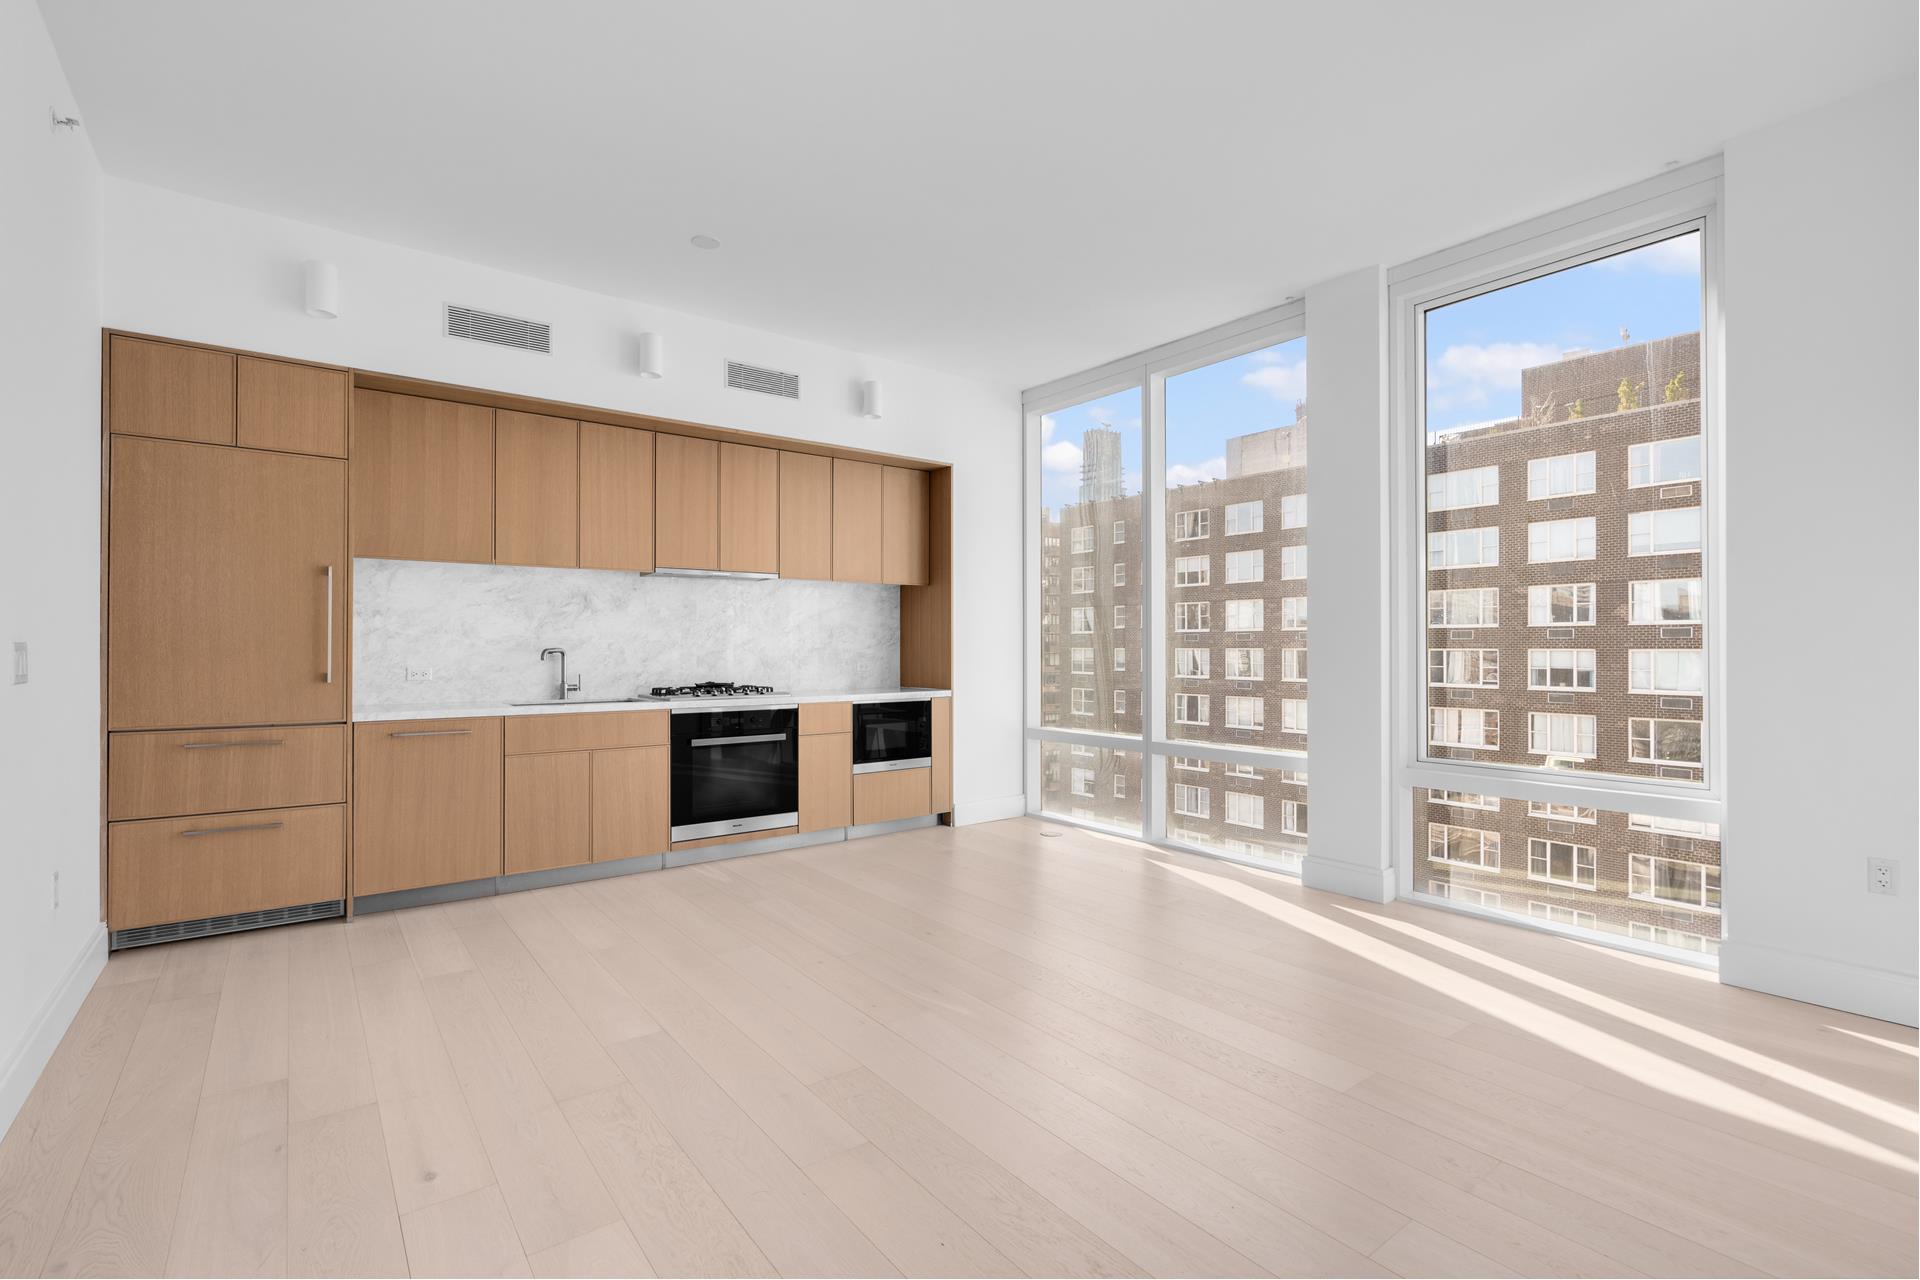 501 3rd Avenue 19D, Gramercy Park And Murray Hill, Downtown, NYC - 1 Bedrooms  
1 Bathrooms  
3 Rooms - 